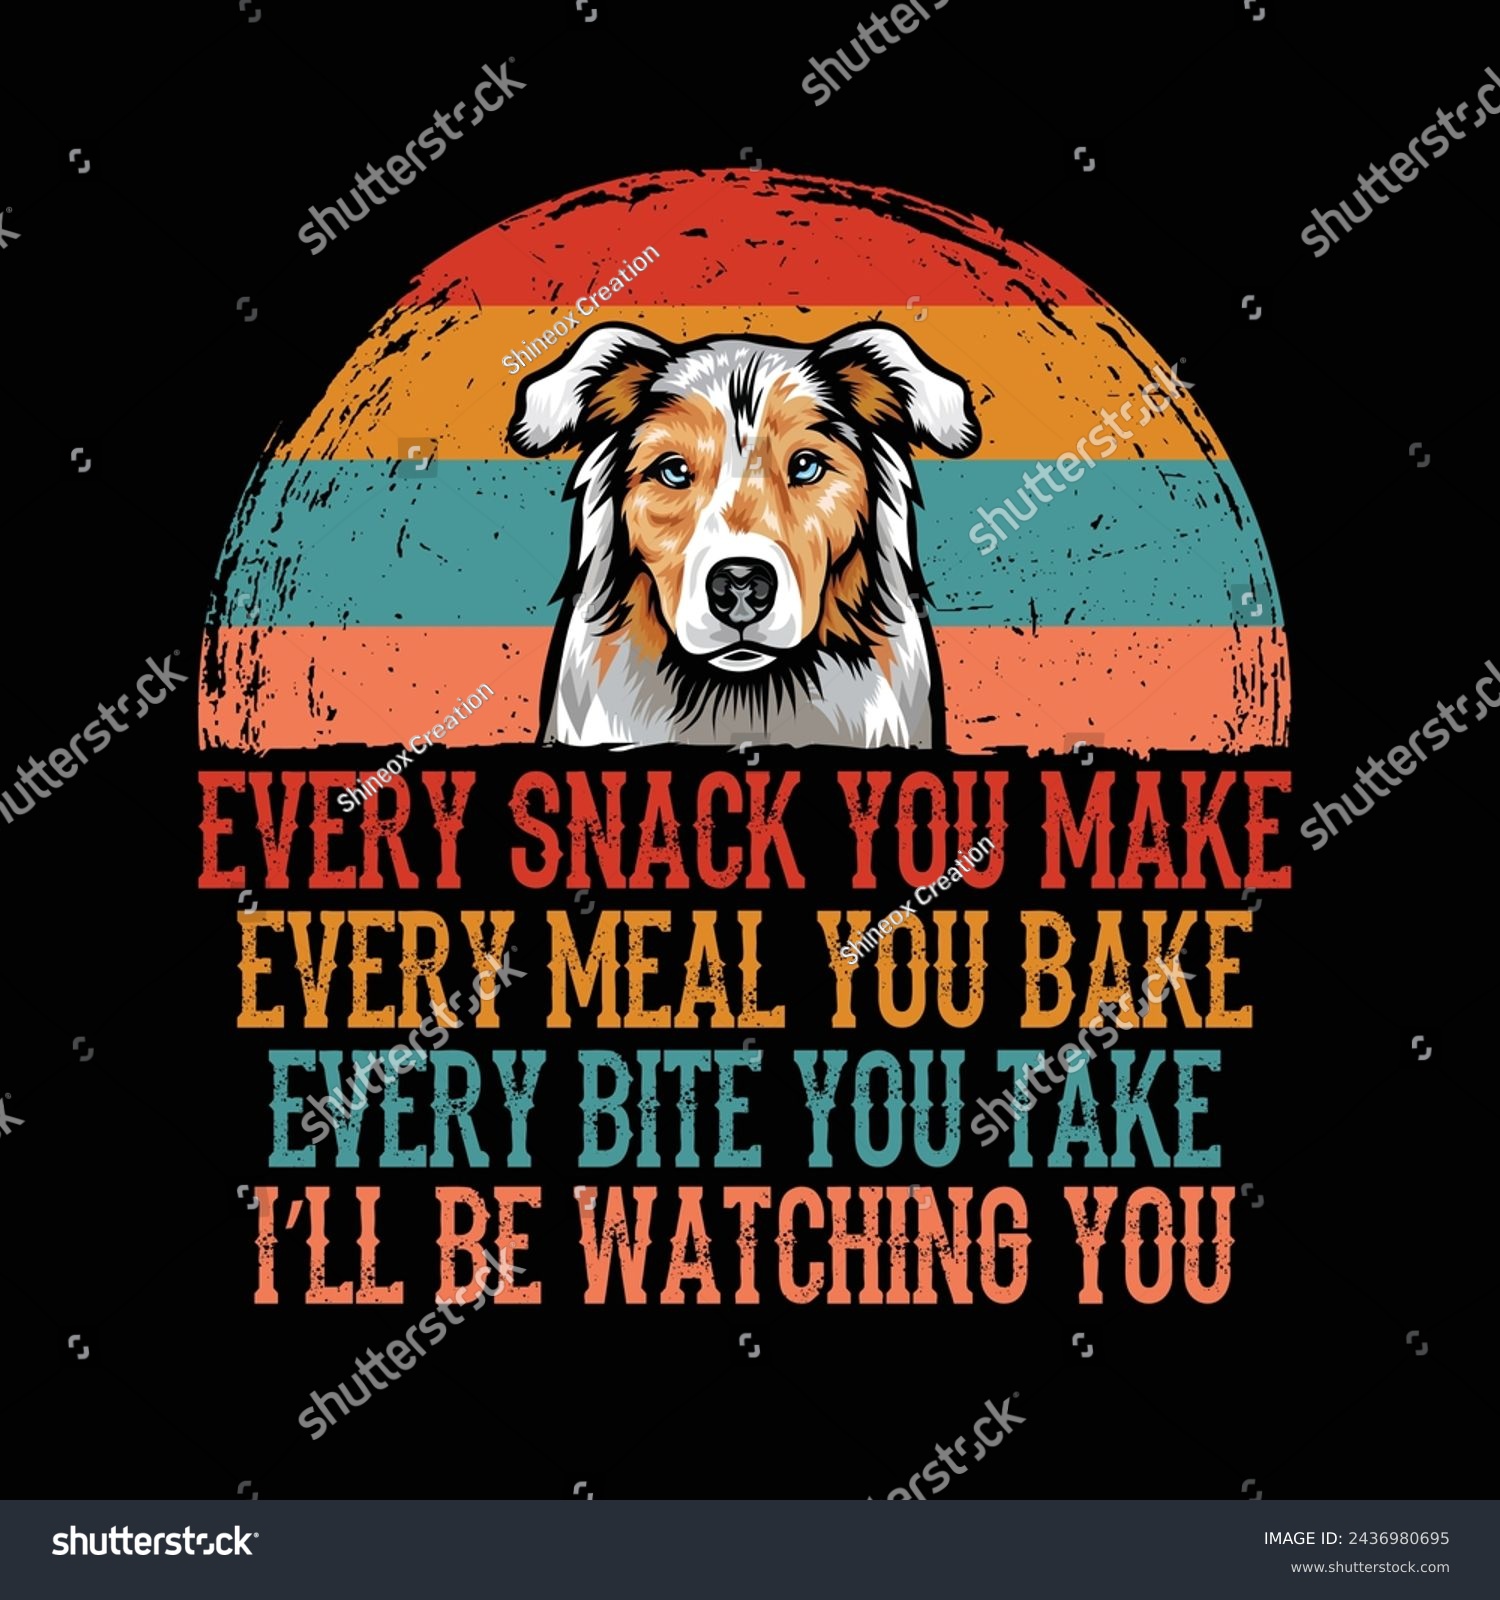 SVG of Every snack you make Every meal you bake Every bite you take I'll Be Watching You Australian Shepherd Dog Typography t-shirt Design Vector svg